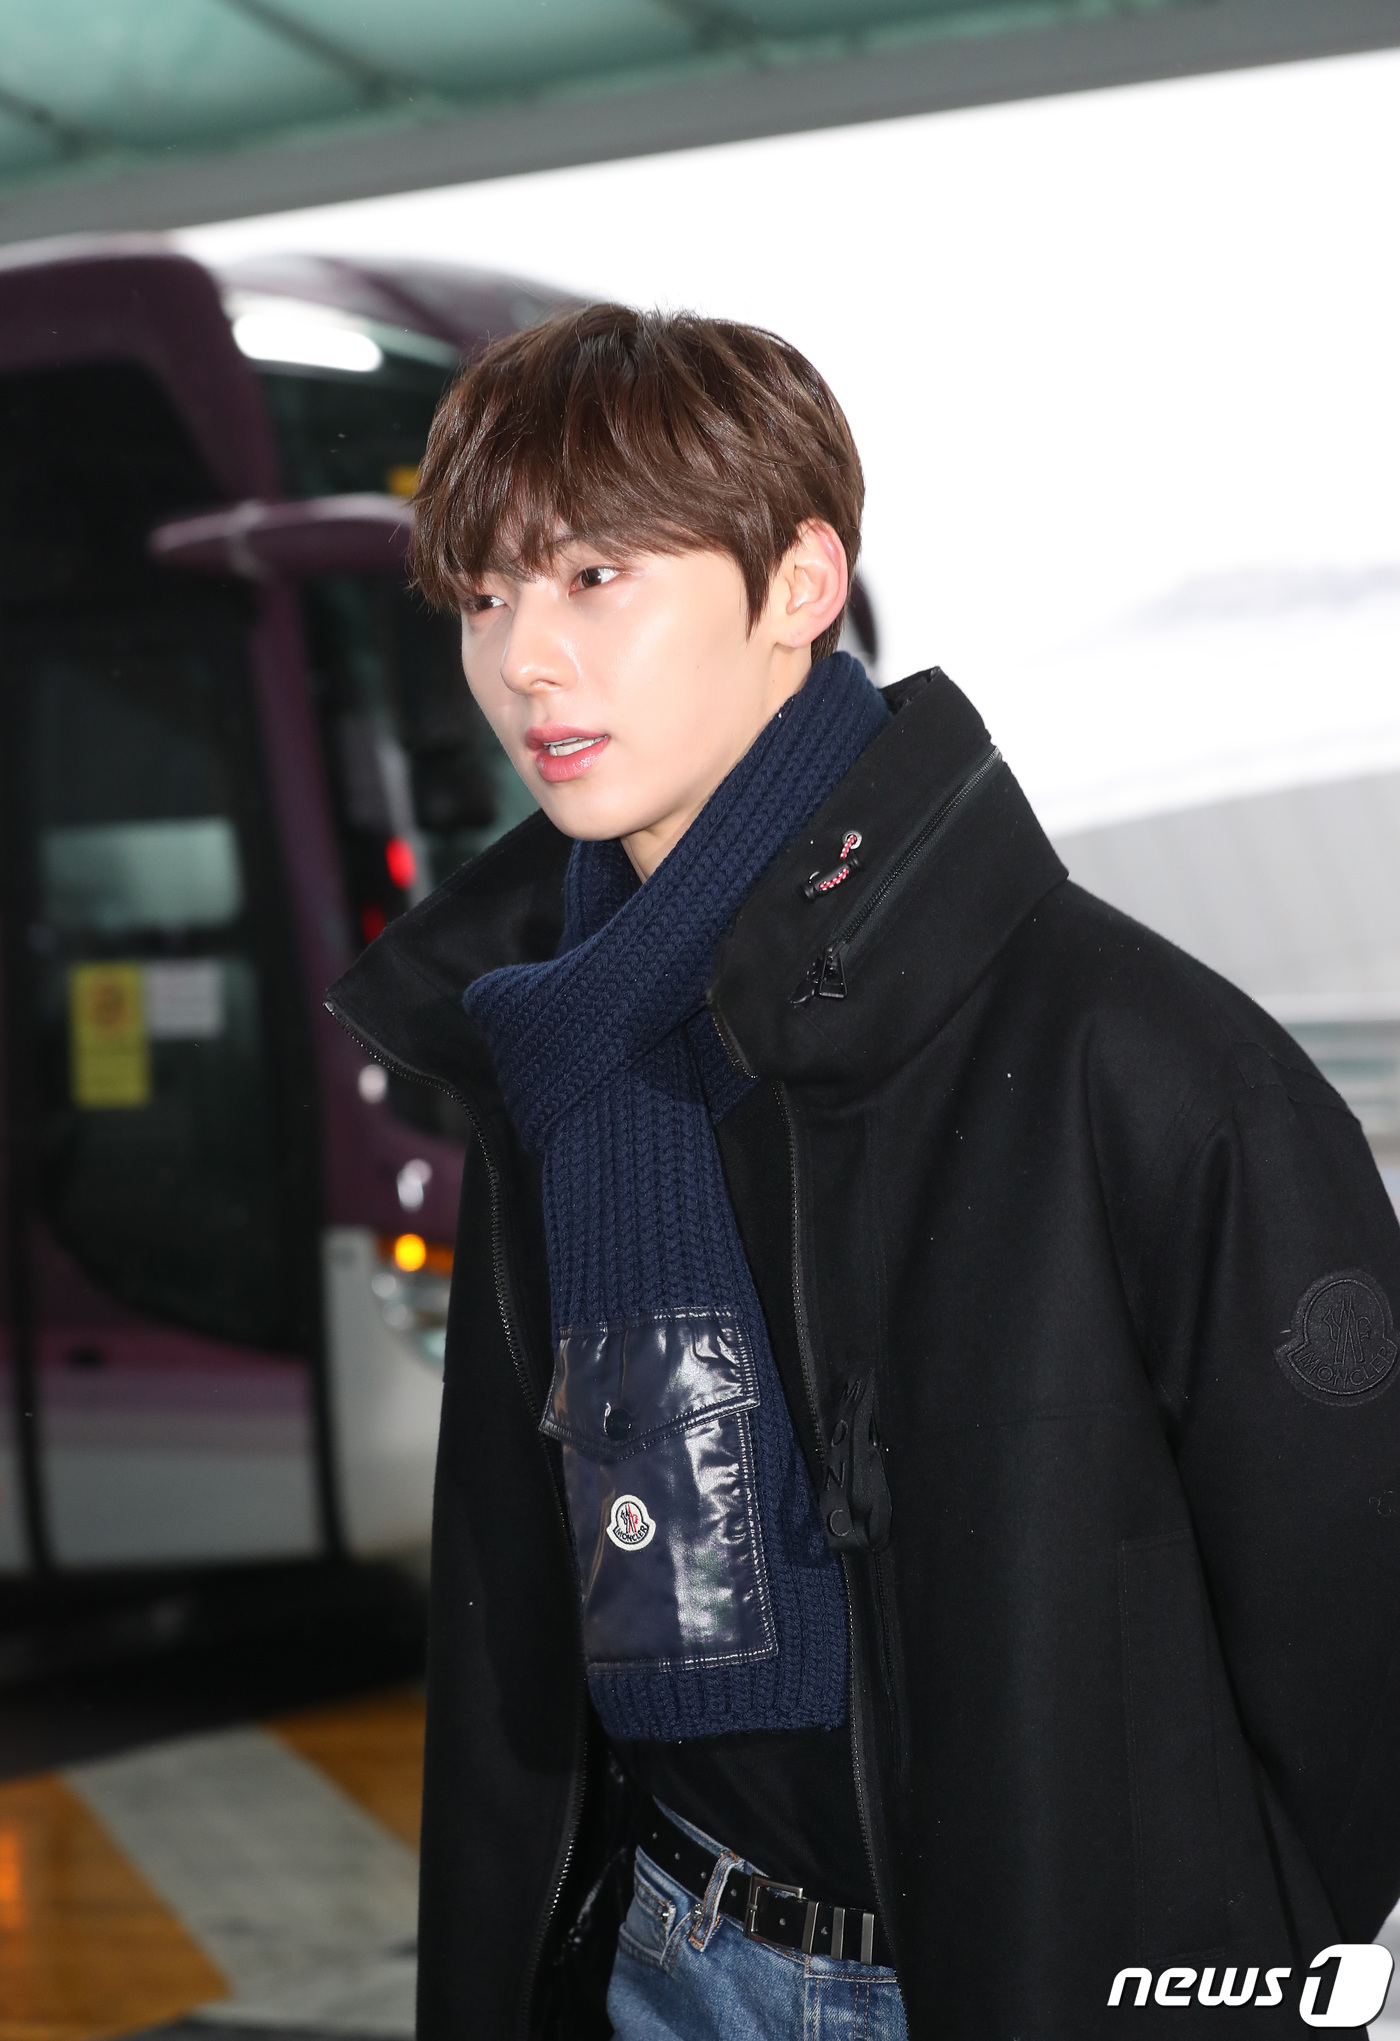 Incheon International Airport = = NUEST Hwang Min-hyun, a former Wanna One, is leaving for Milan, Italy via Incheon International Airport on the morning of the 19th to attend Fashion Week. 2019.2.19